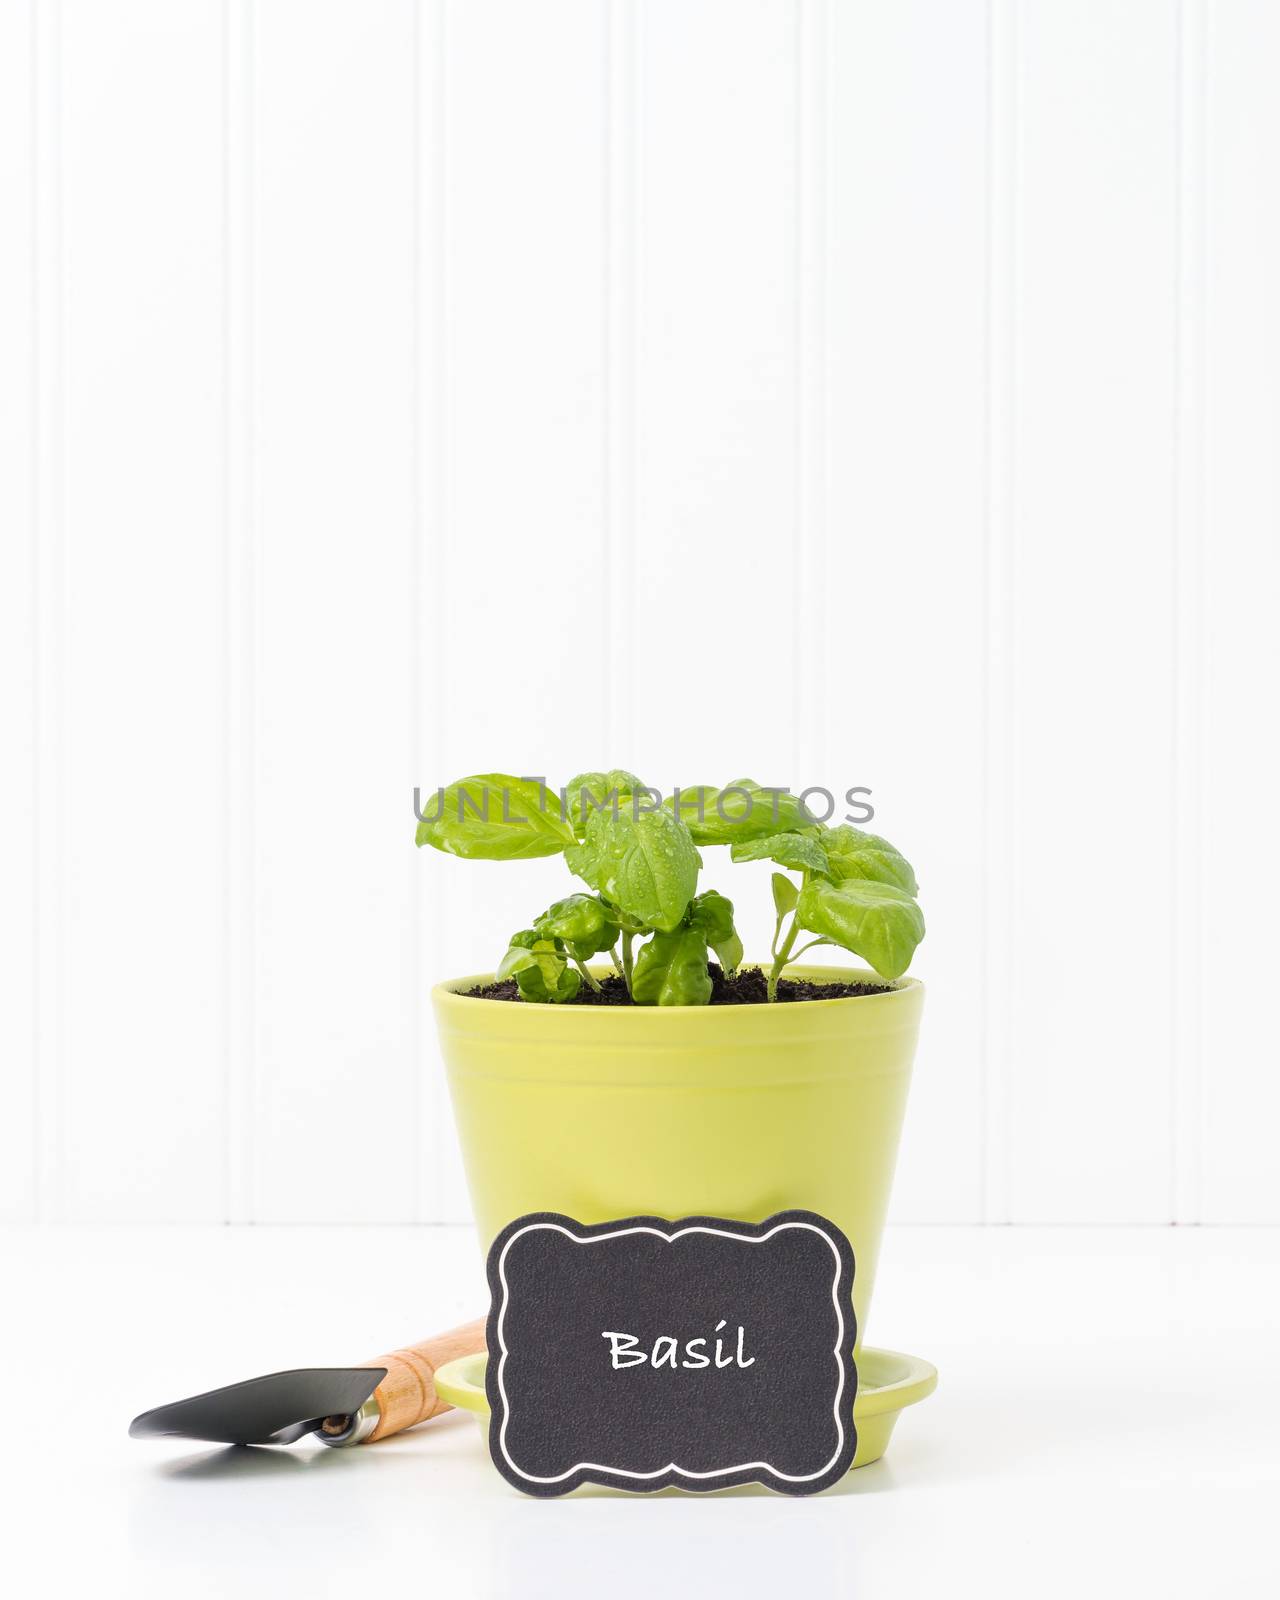 Herbs-Basil by billberryphotography